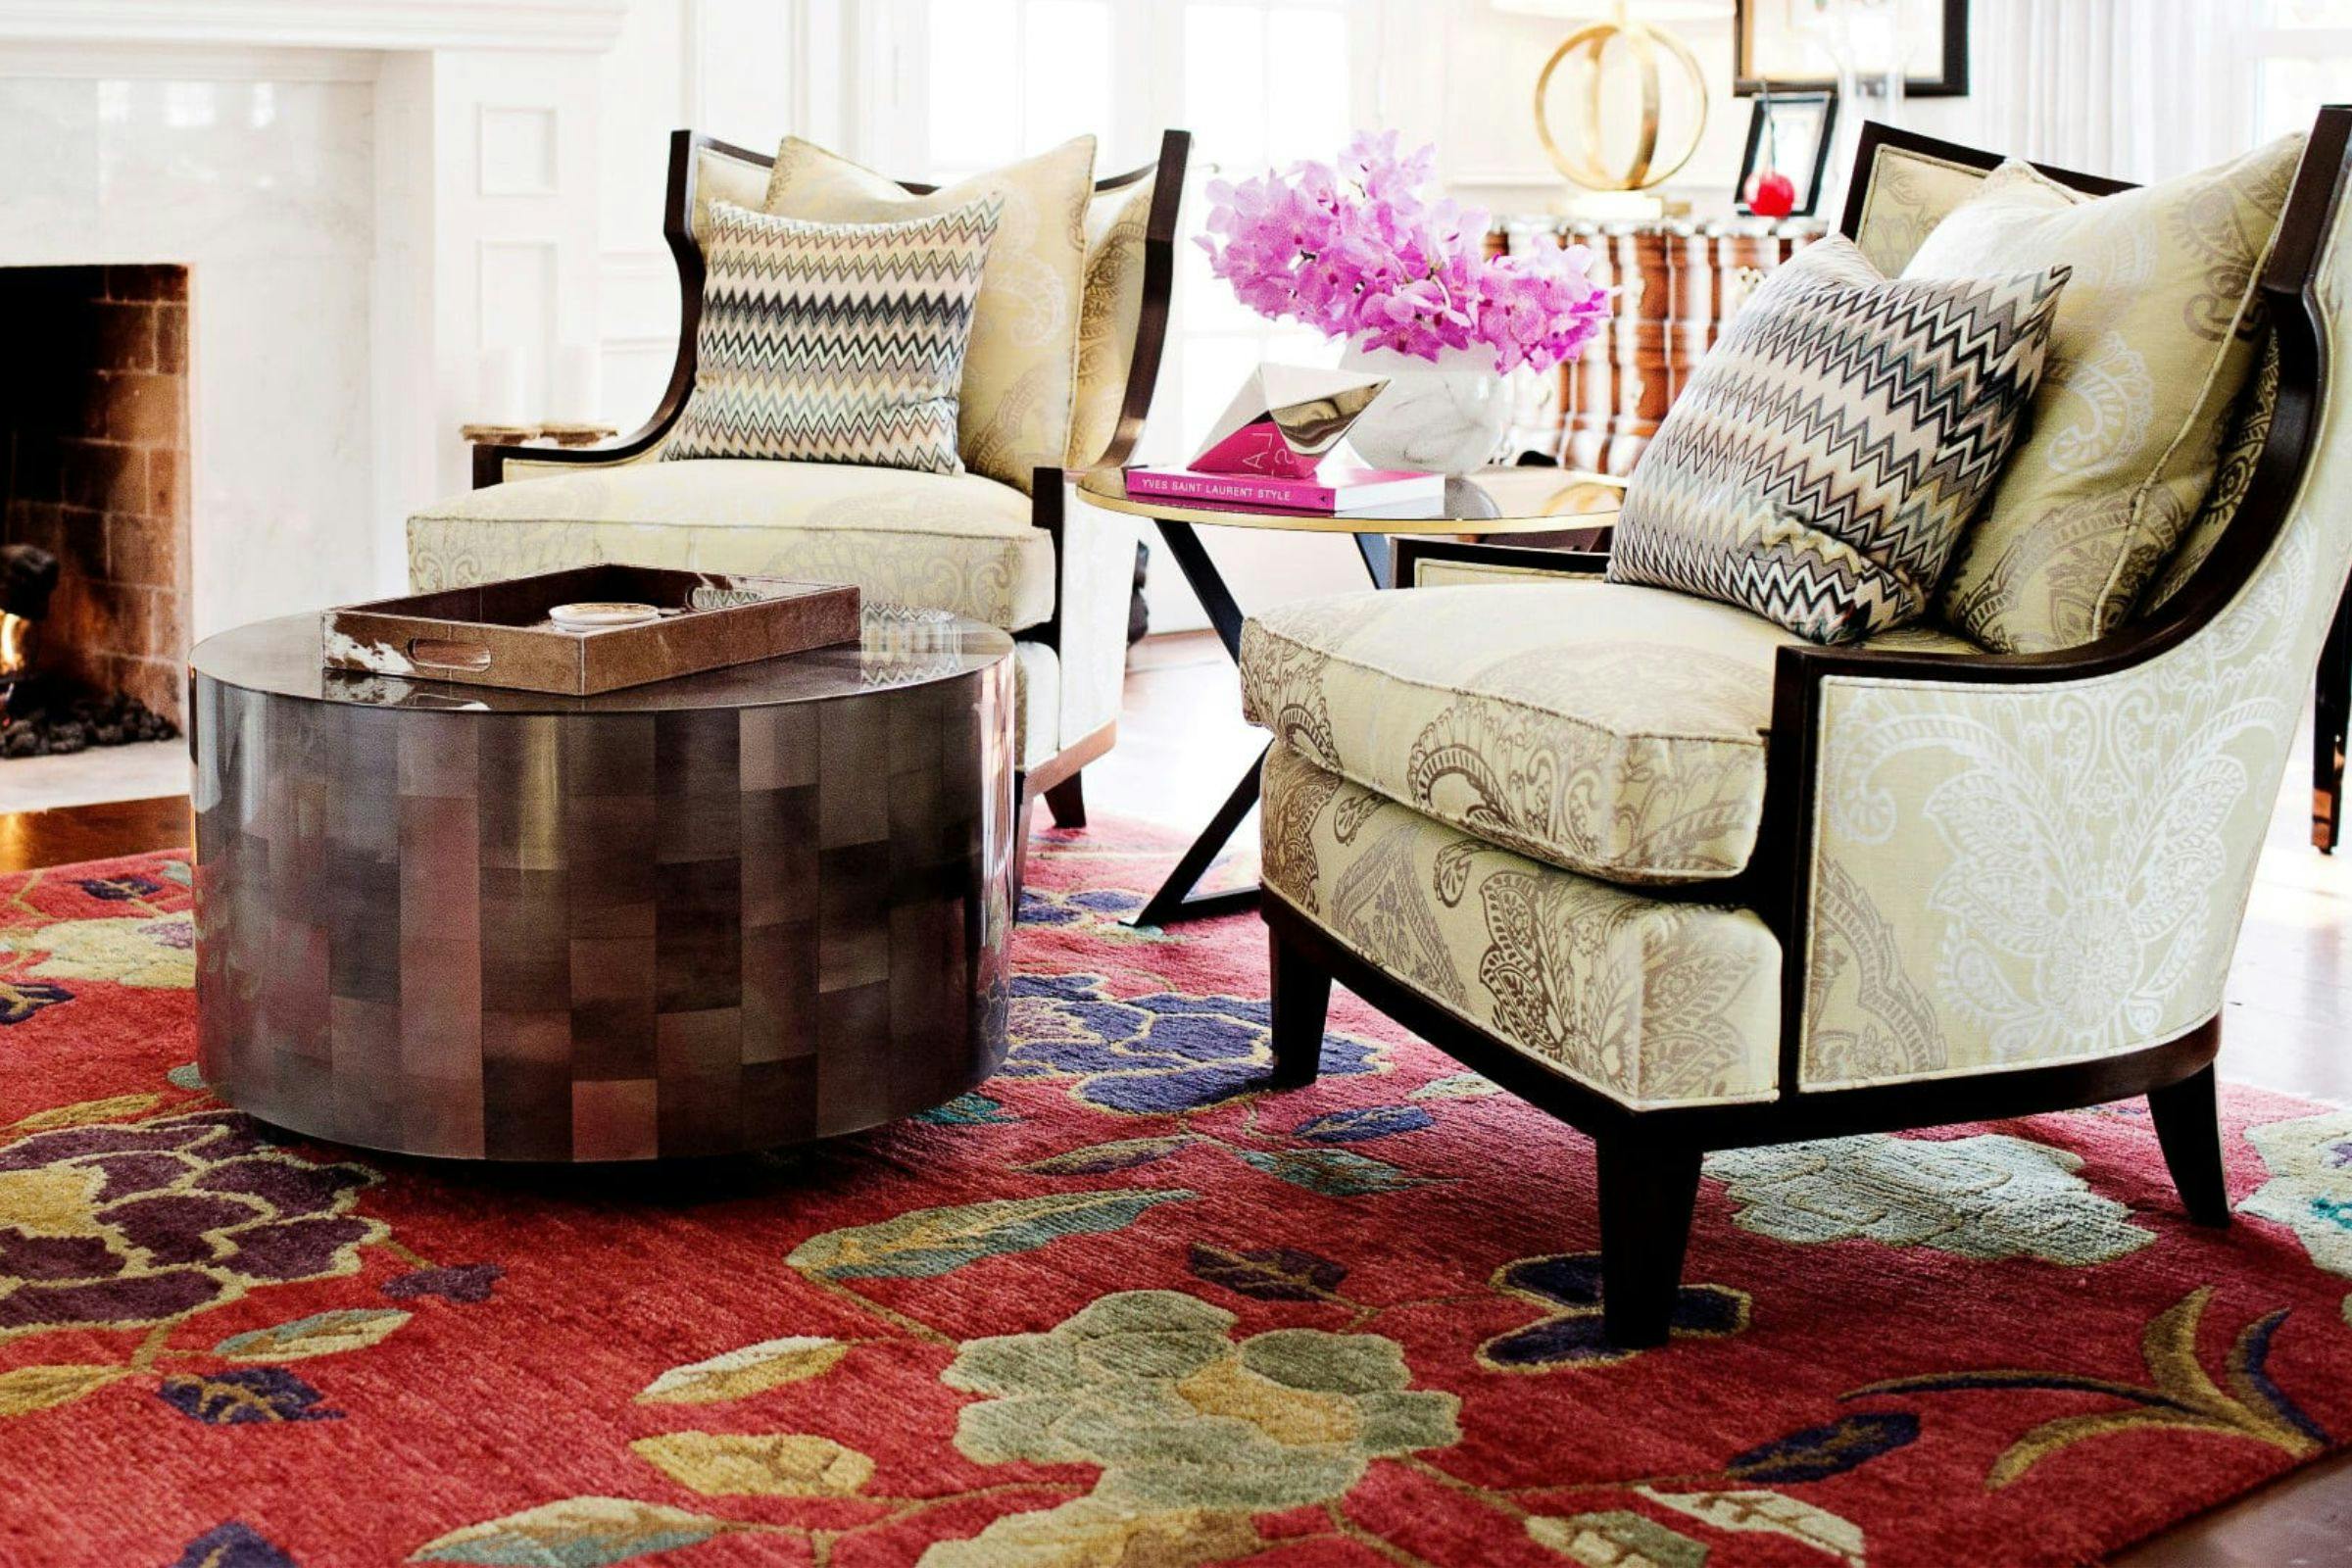 Barbara Barry baker chairs, Missoni cushions, red rug